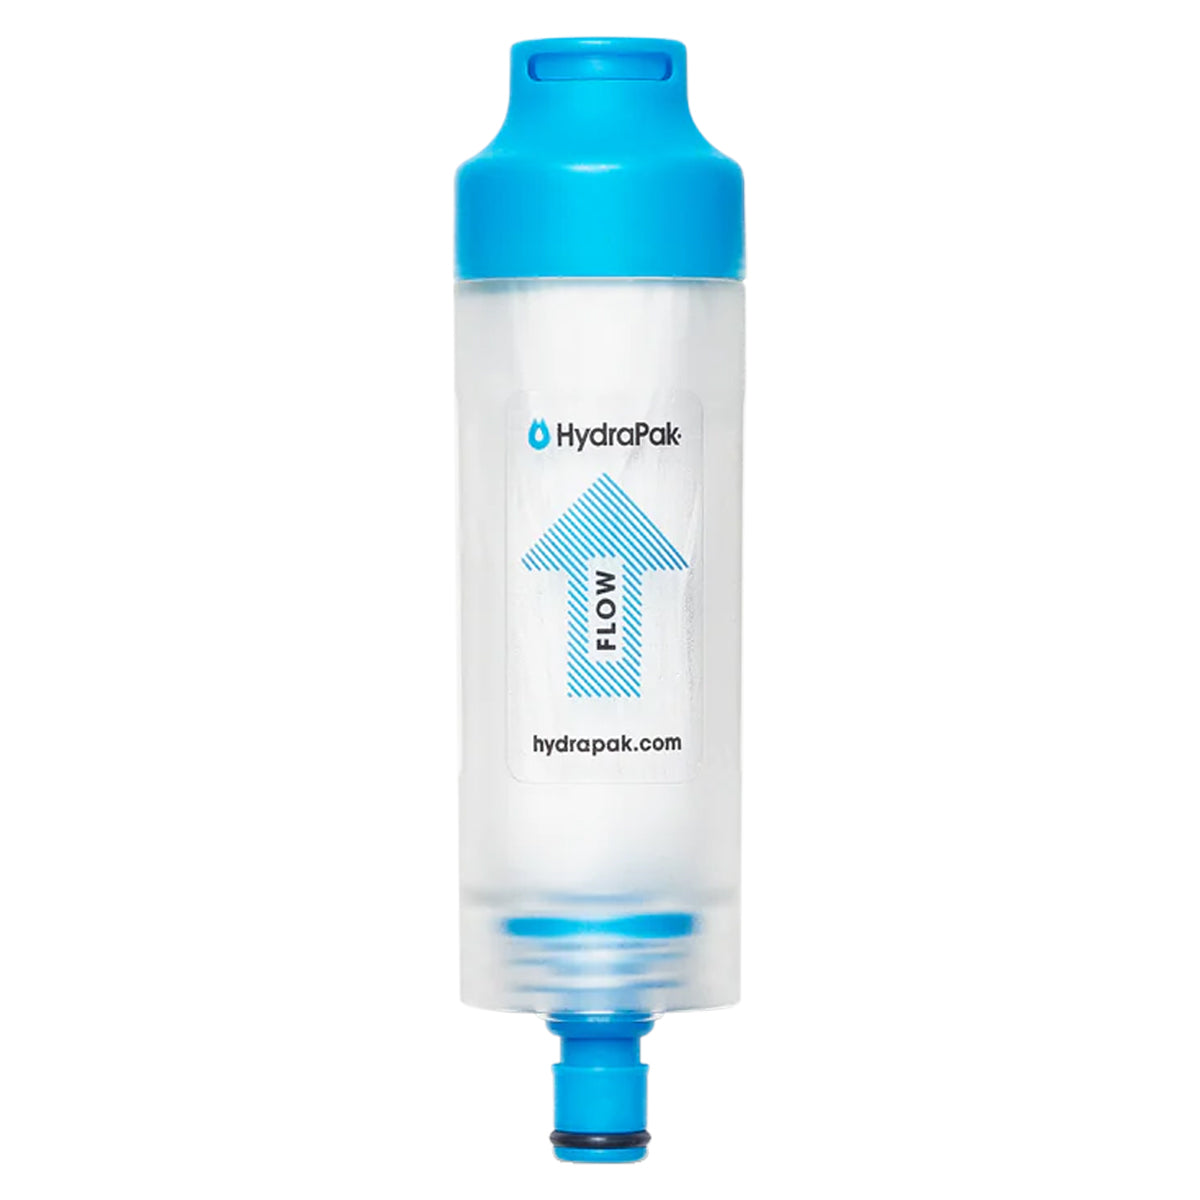 HydraPak 28mm Inline Filter in  by GOHUNT | Hydrapak - GOHUNT Shop